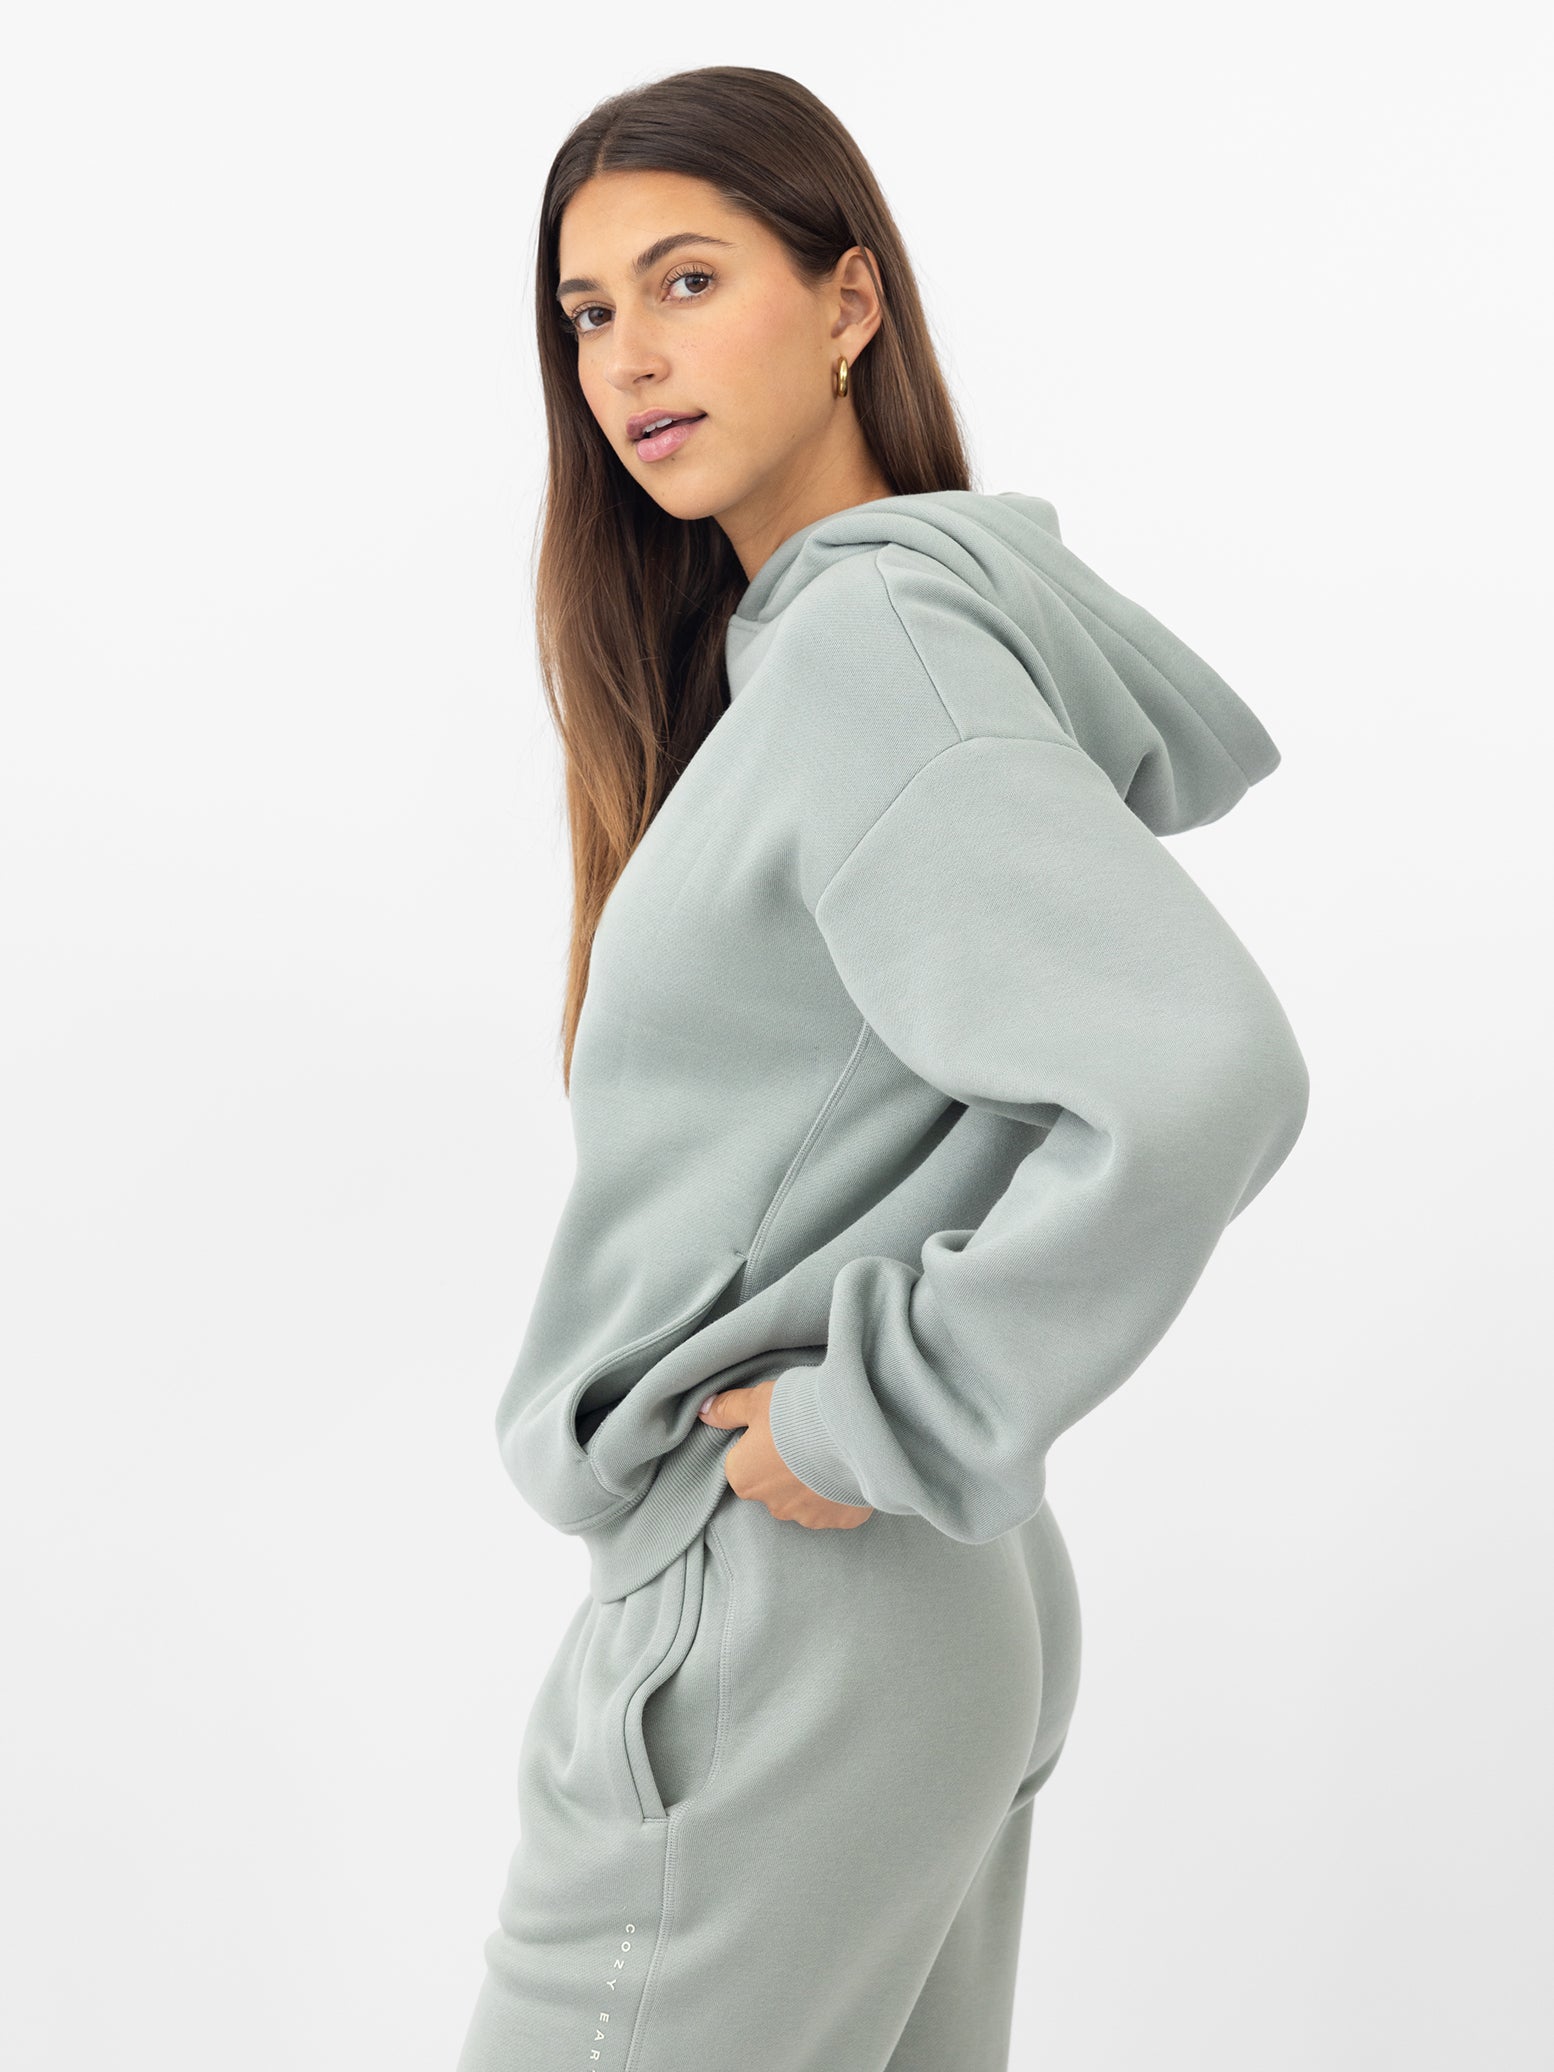 Sid eview of woman wearing haze cityscape hoodie with white background 